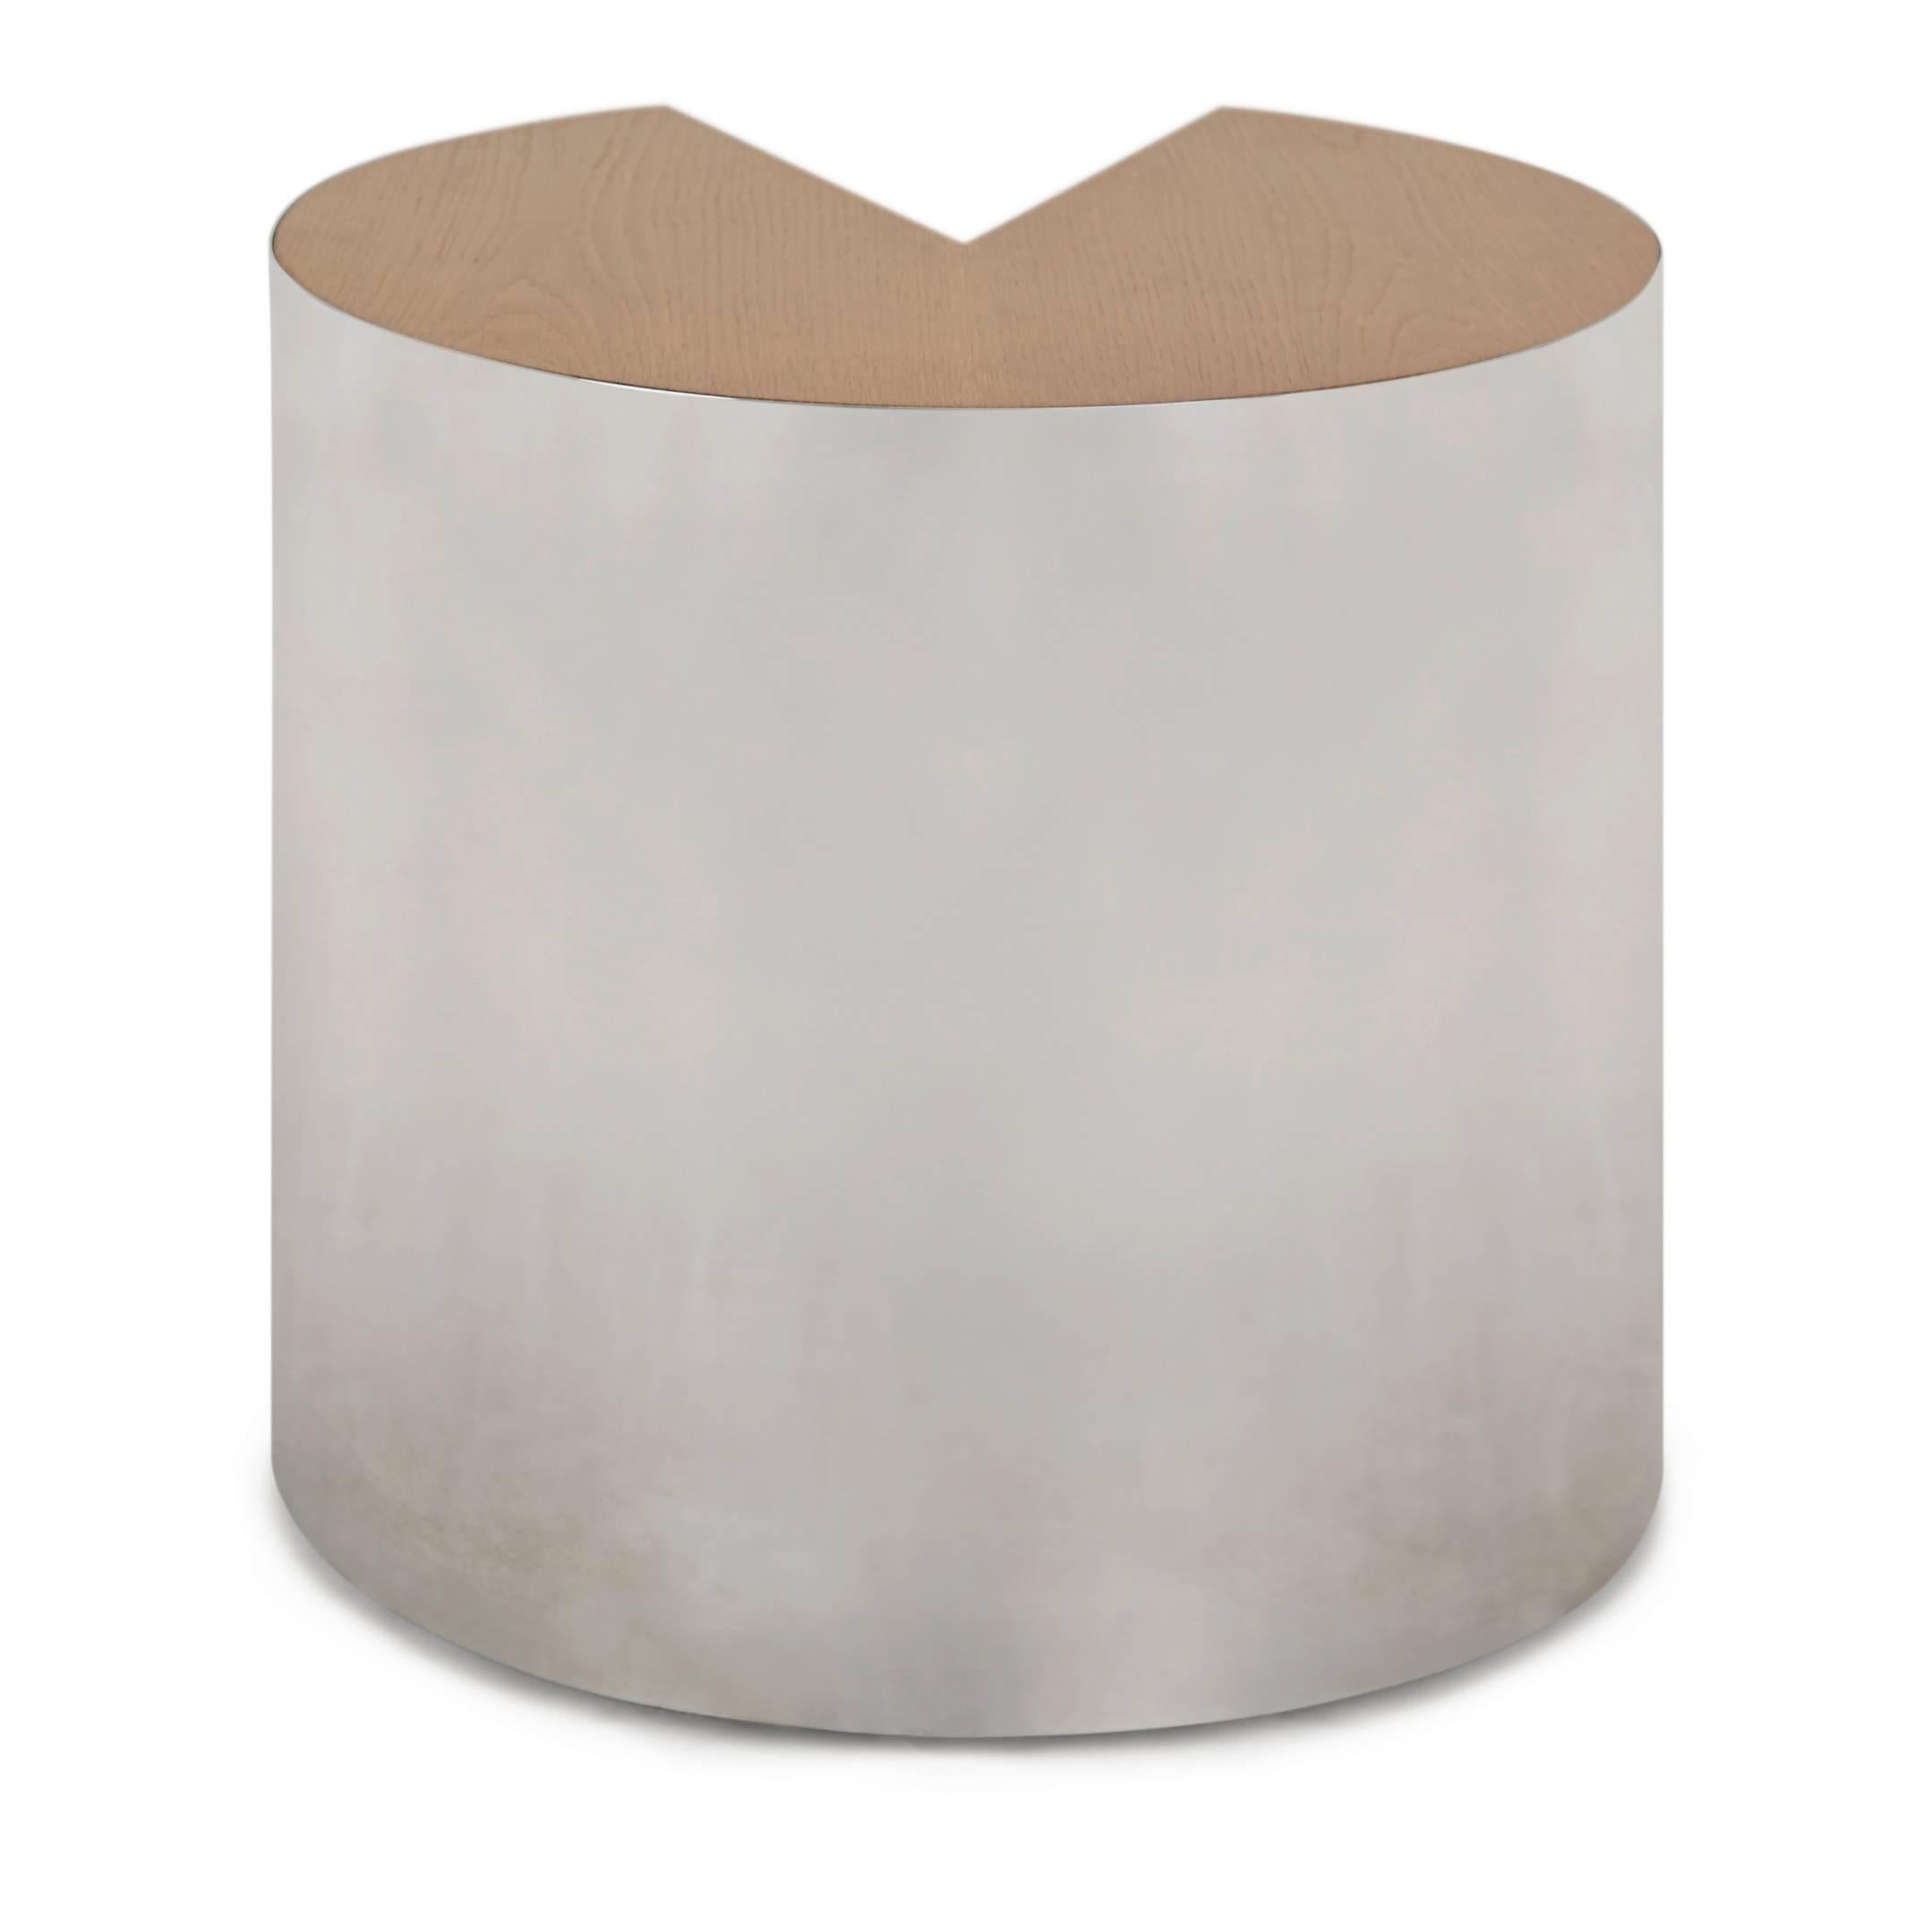 High quality and well-made chrome fronted circular shaped Pace side table with veneer wood cut-out shape, which provides a visually interesting contrast of materials and textures. This 